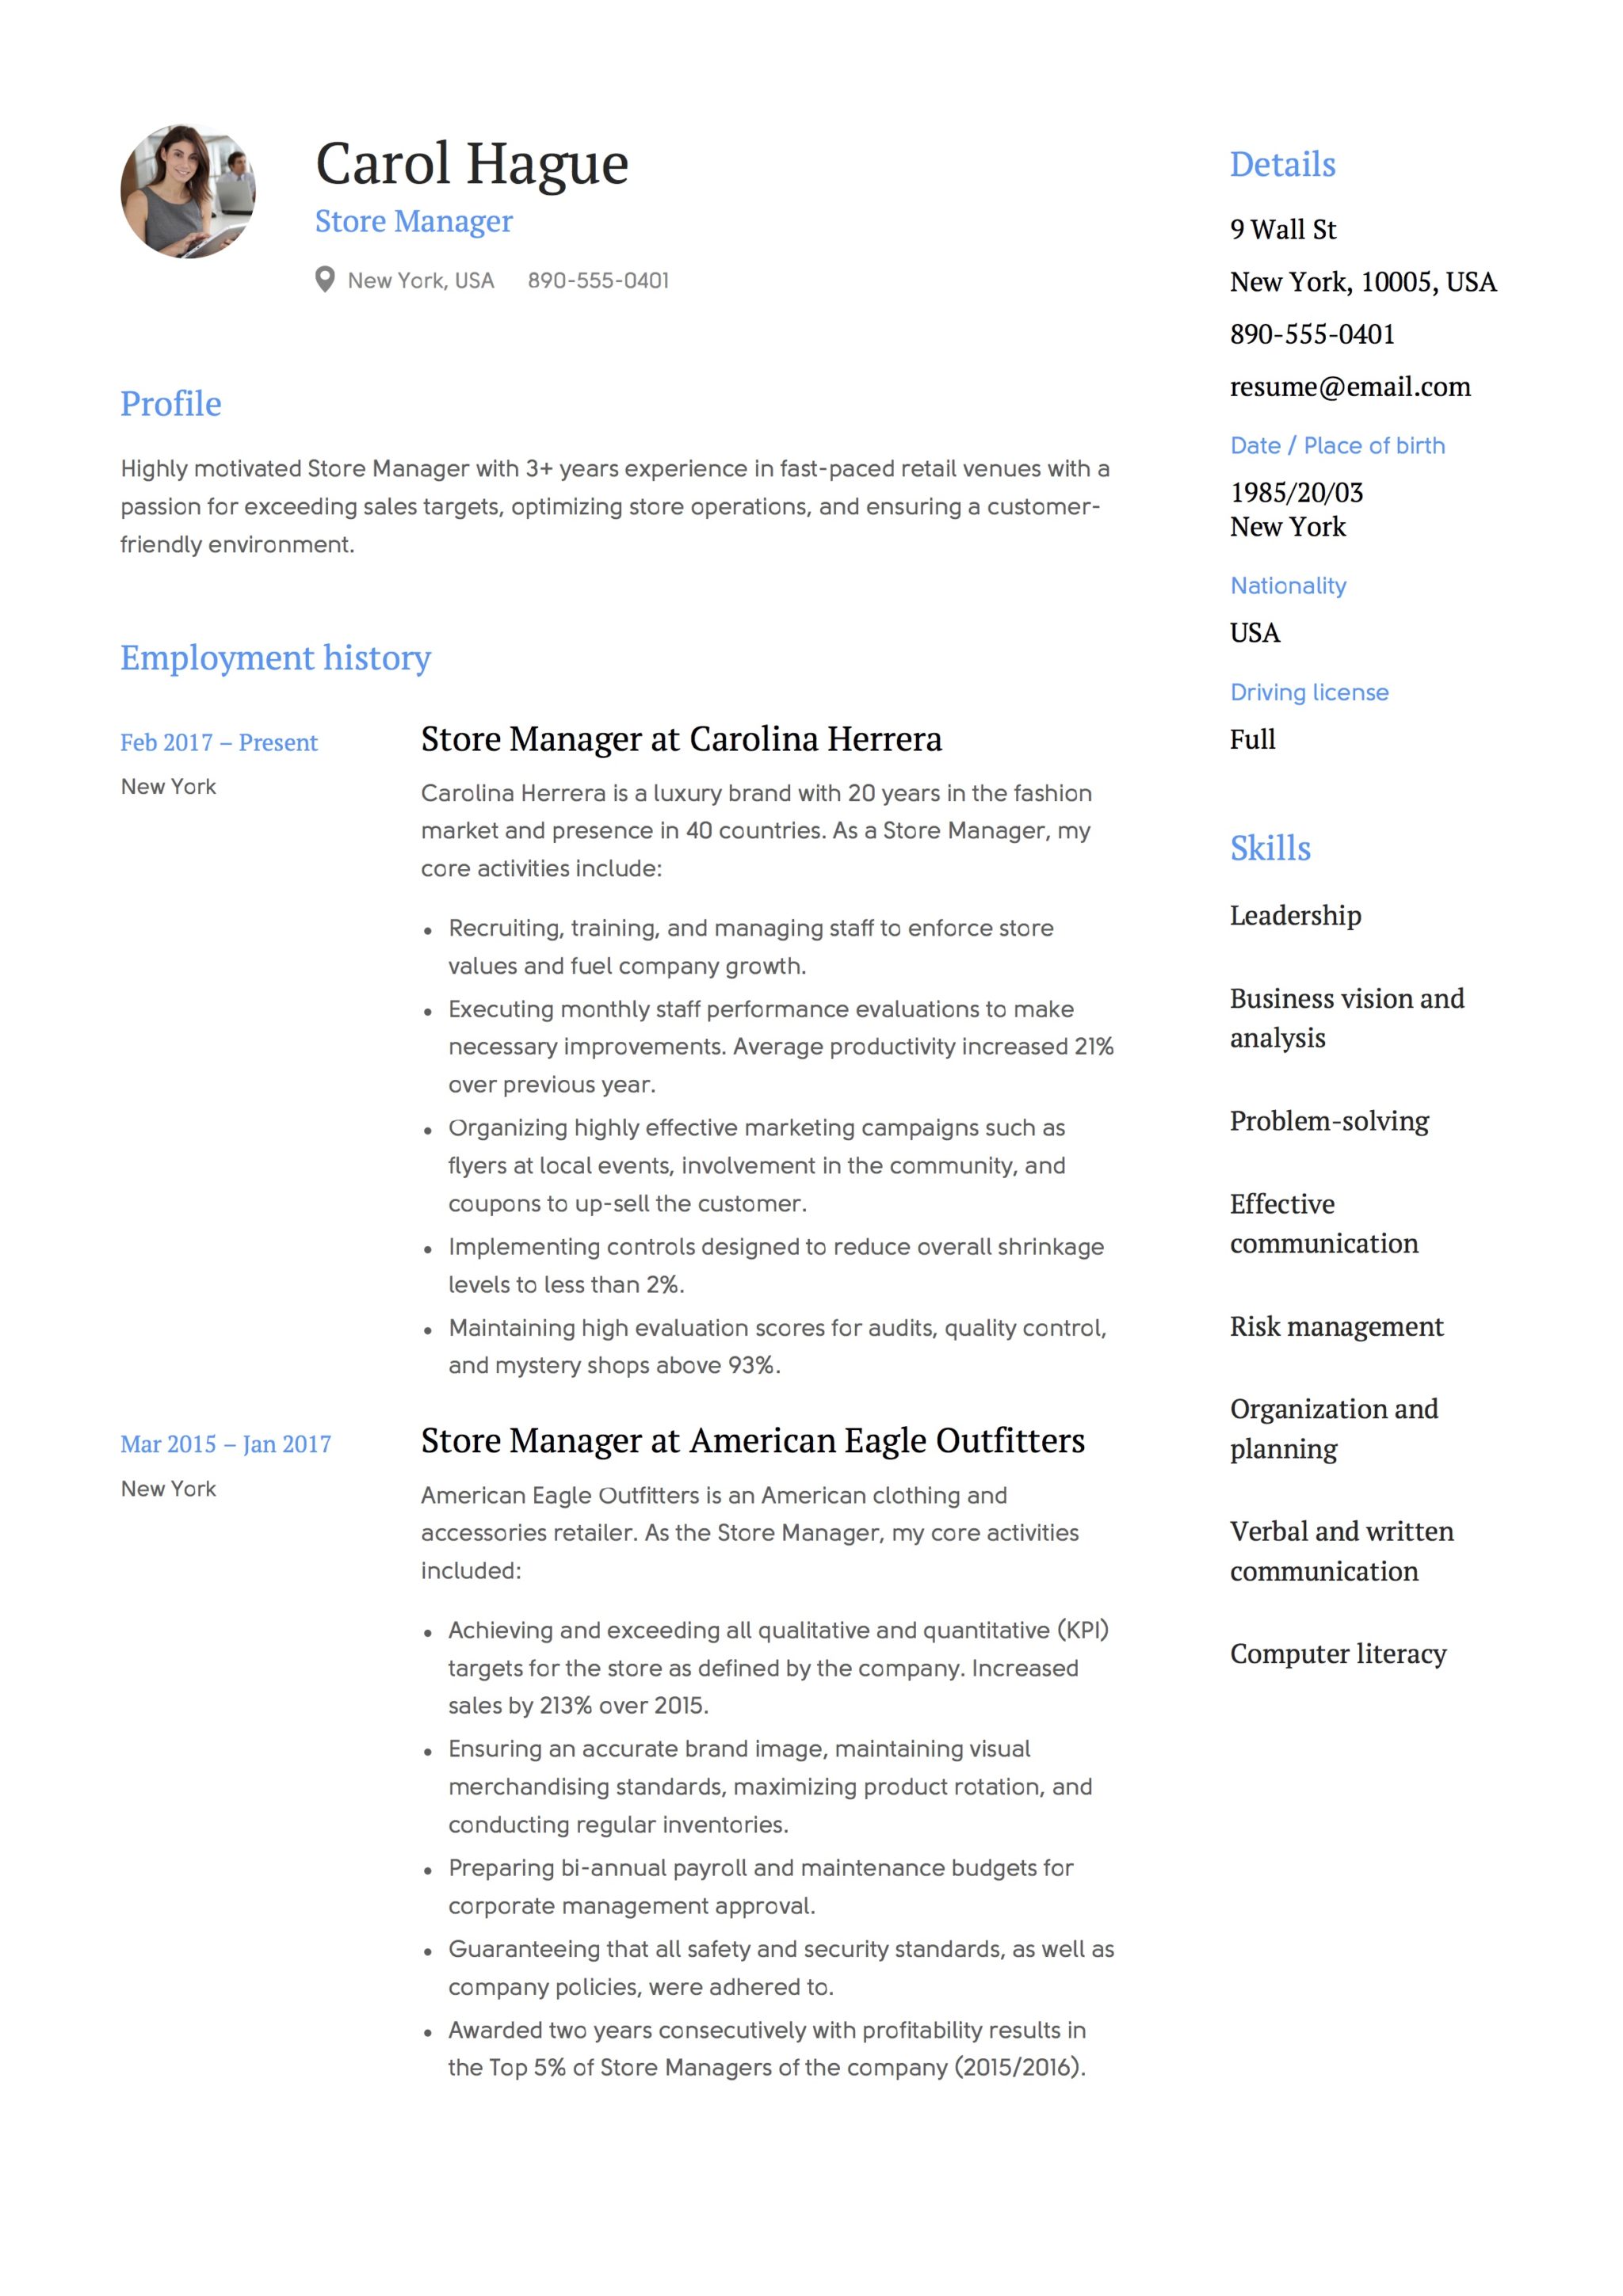 Store Manager CV Template